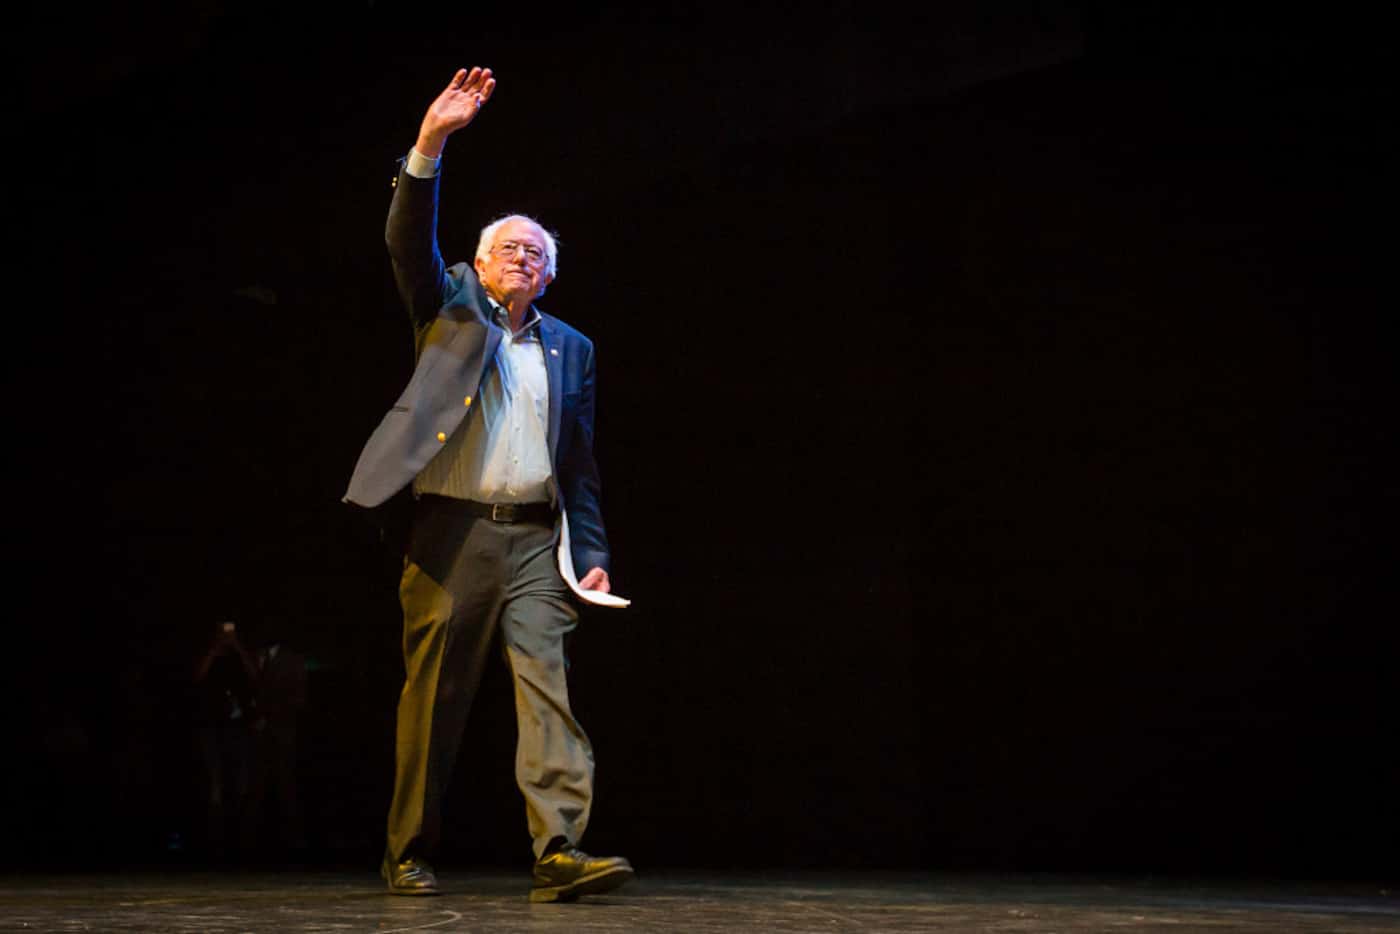 Vermont senator Bernie Sanders takes the stage for a rally at the Verizon Theater on...